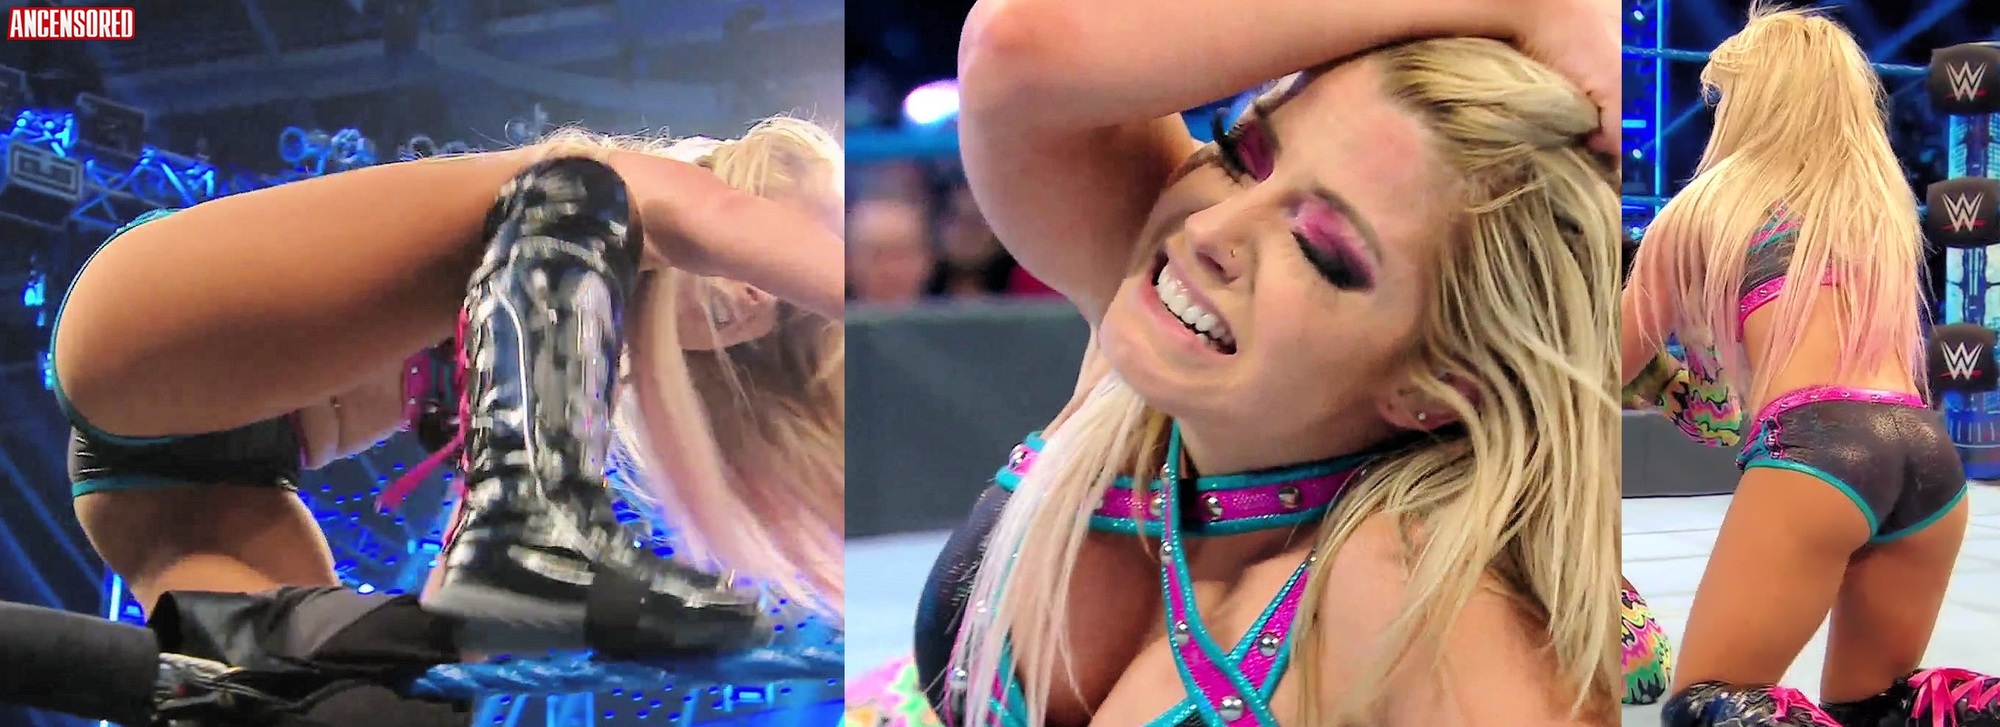 Alexa bliss nude pictures